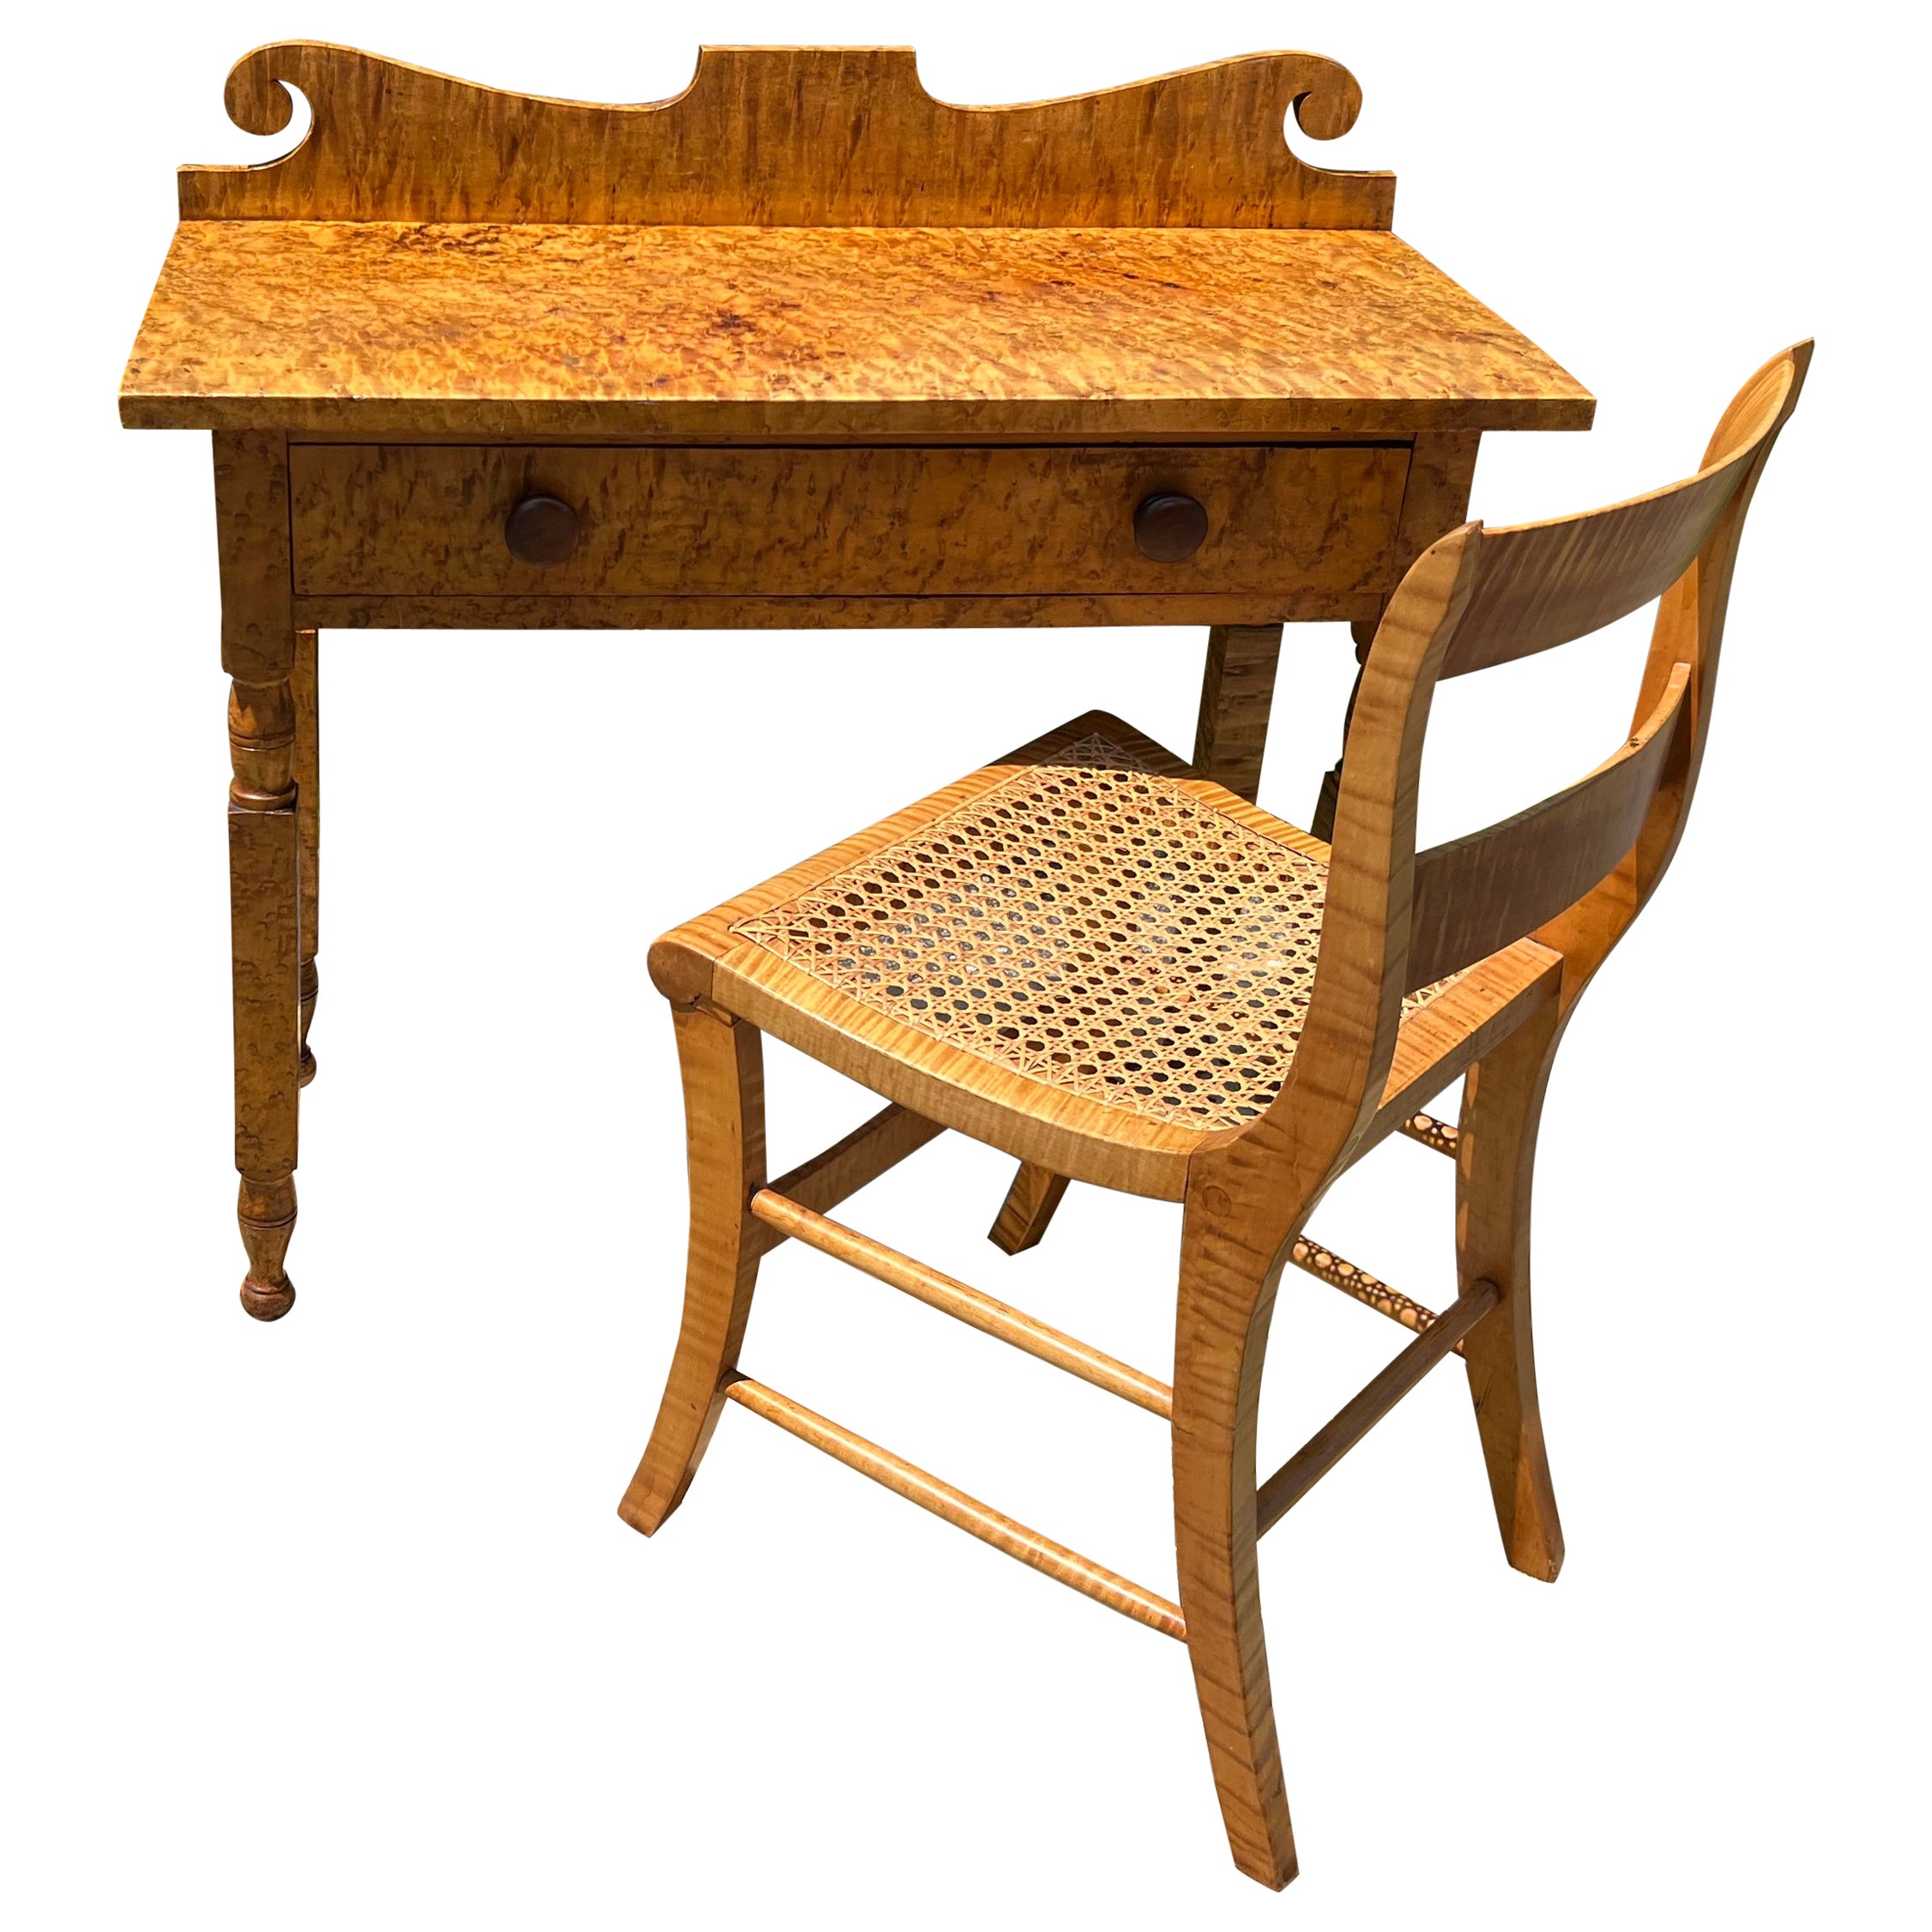 19th Century Well Figured Tiger Maple Desk With Chair - a Set of 2 For Sale